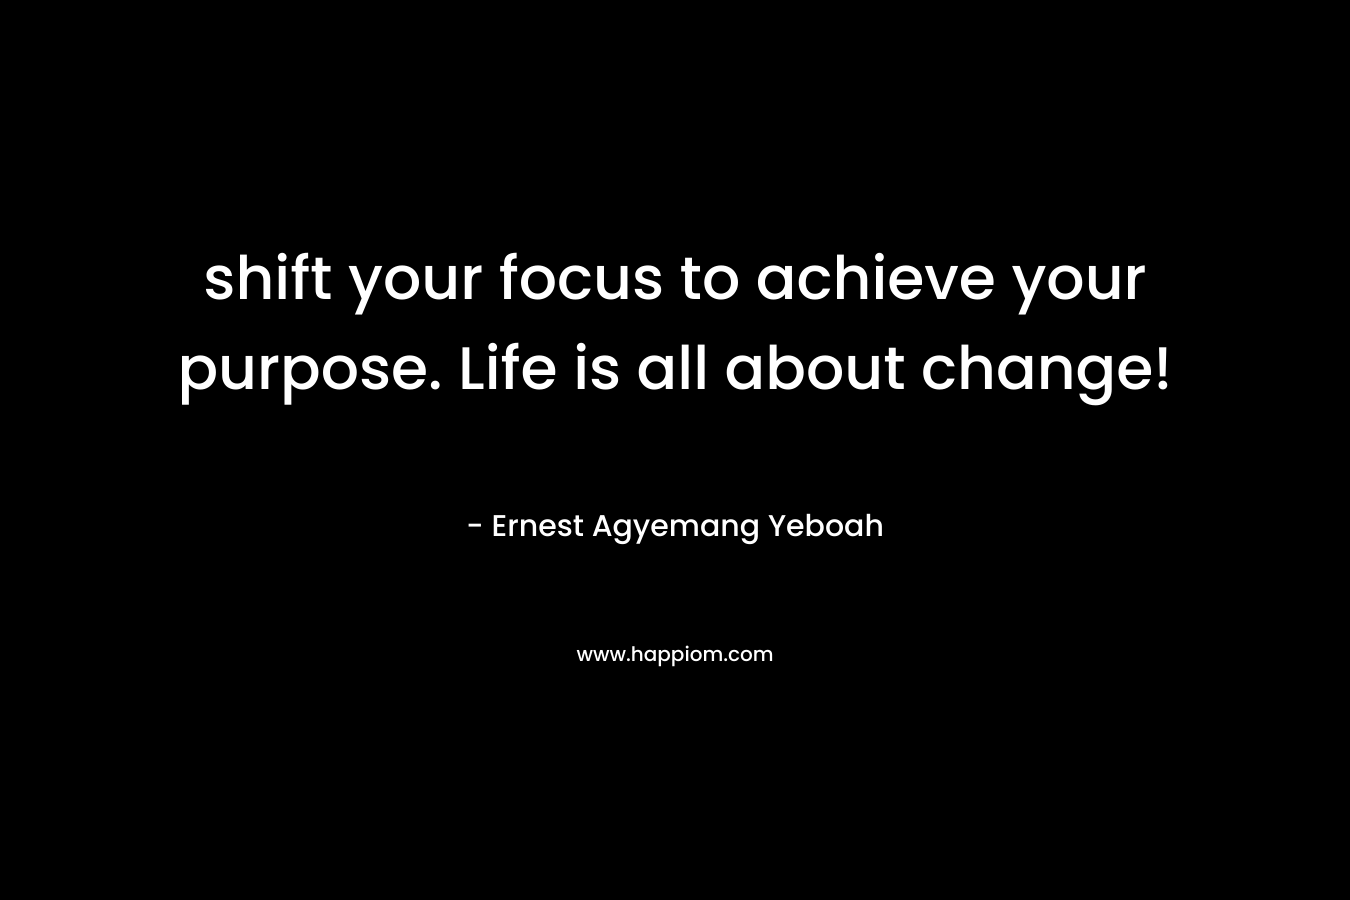 shift your focus to achieve your purpose. Life is all about change!